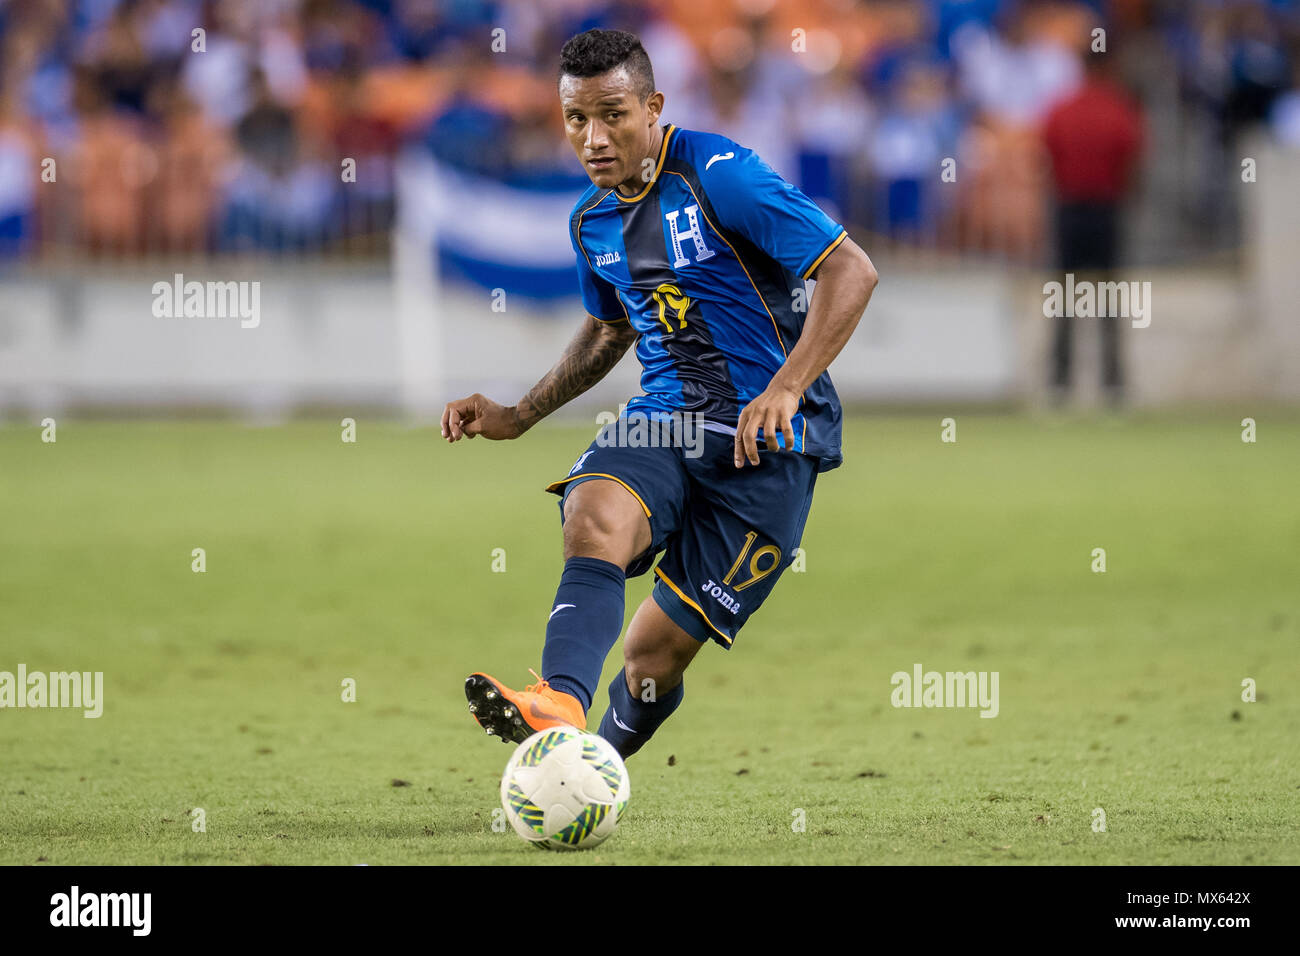 Houston, TX, USA. 2nd June, 2018. Honduras Luis Garrido (19) passes the ball during an international soccer friendly match between Honduras and El Salvador at BBVA Compass Stadium in Houston, TX. El Salvador won the game 1 to 0.Trask Smith/CSM/Alamy Live News Stock Photo